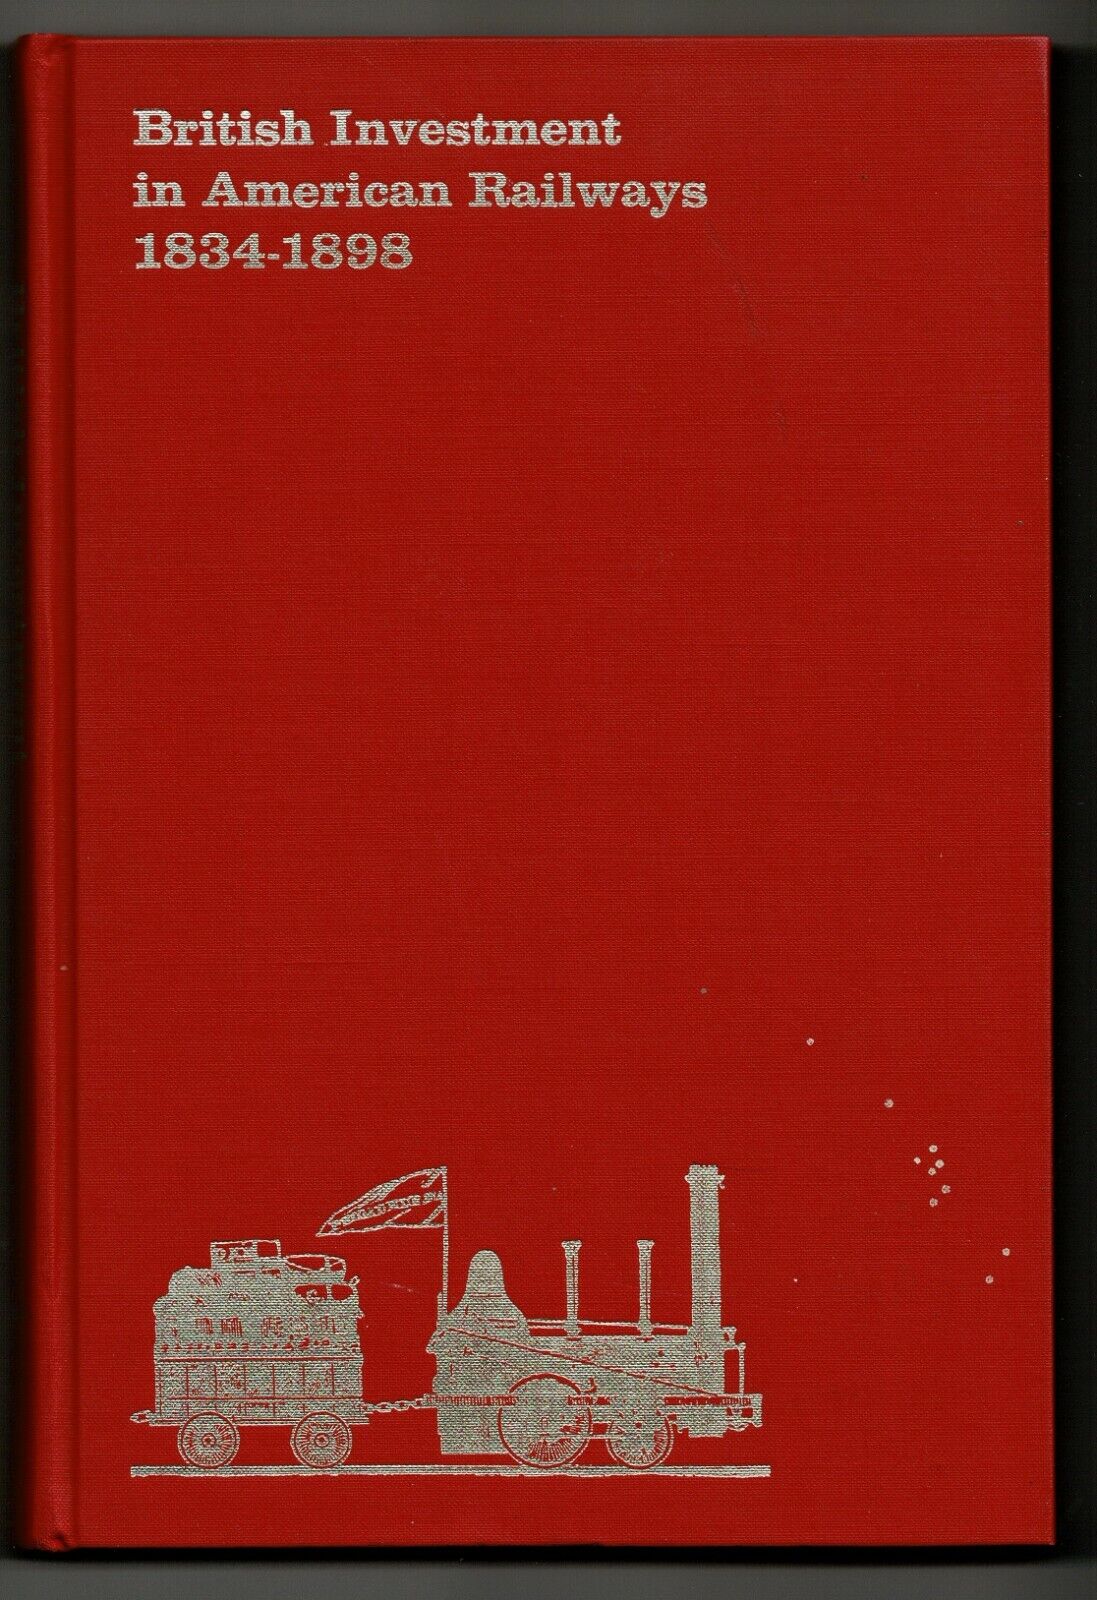 BRITISH INVESTMENT IN AMERICAN RAILWAYS 1834-1898 by Adler & Hidy, 1970, 253 Pg.